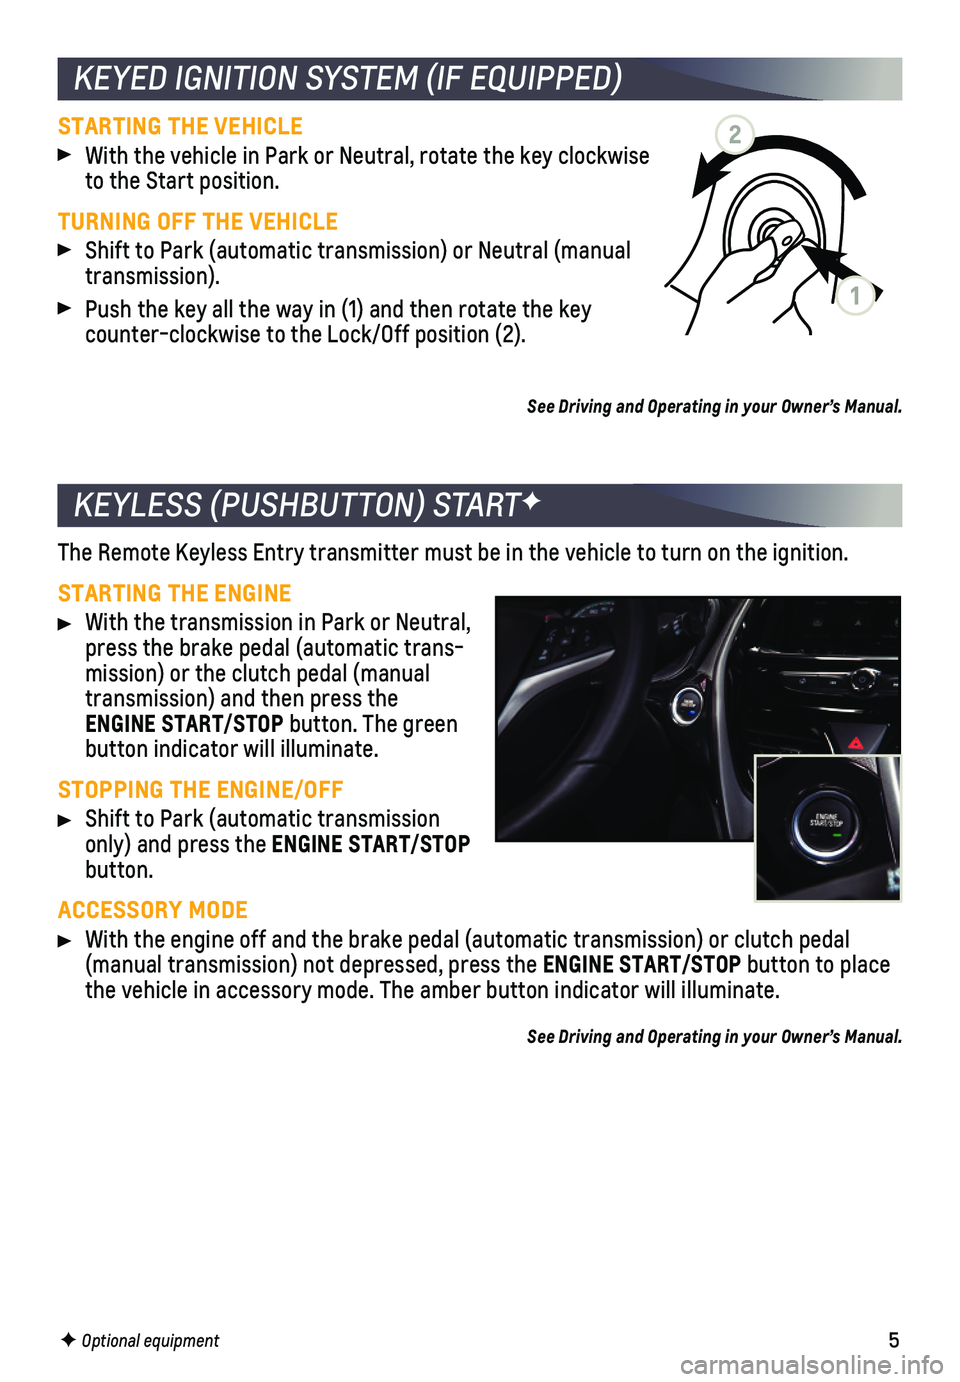 CHEVROLET SPARK 2019  Get To Know Guide 5
KEYLESS (PUSHBUTTON) STARTF
The Remote Keyless Entry transmitter must be in the vehicle to turn on t\
he ignition.
STARTING THE ENGINE
 With the transmission in Park or Neutral, press the brake peda